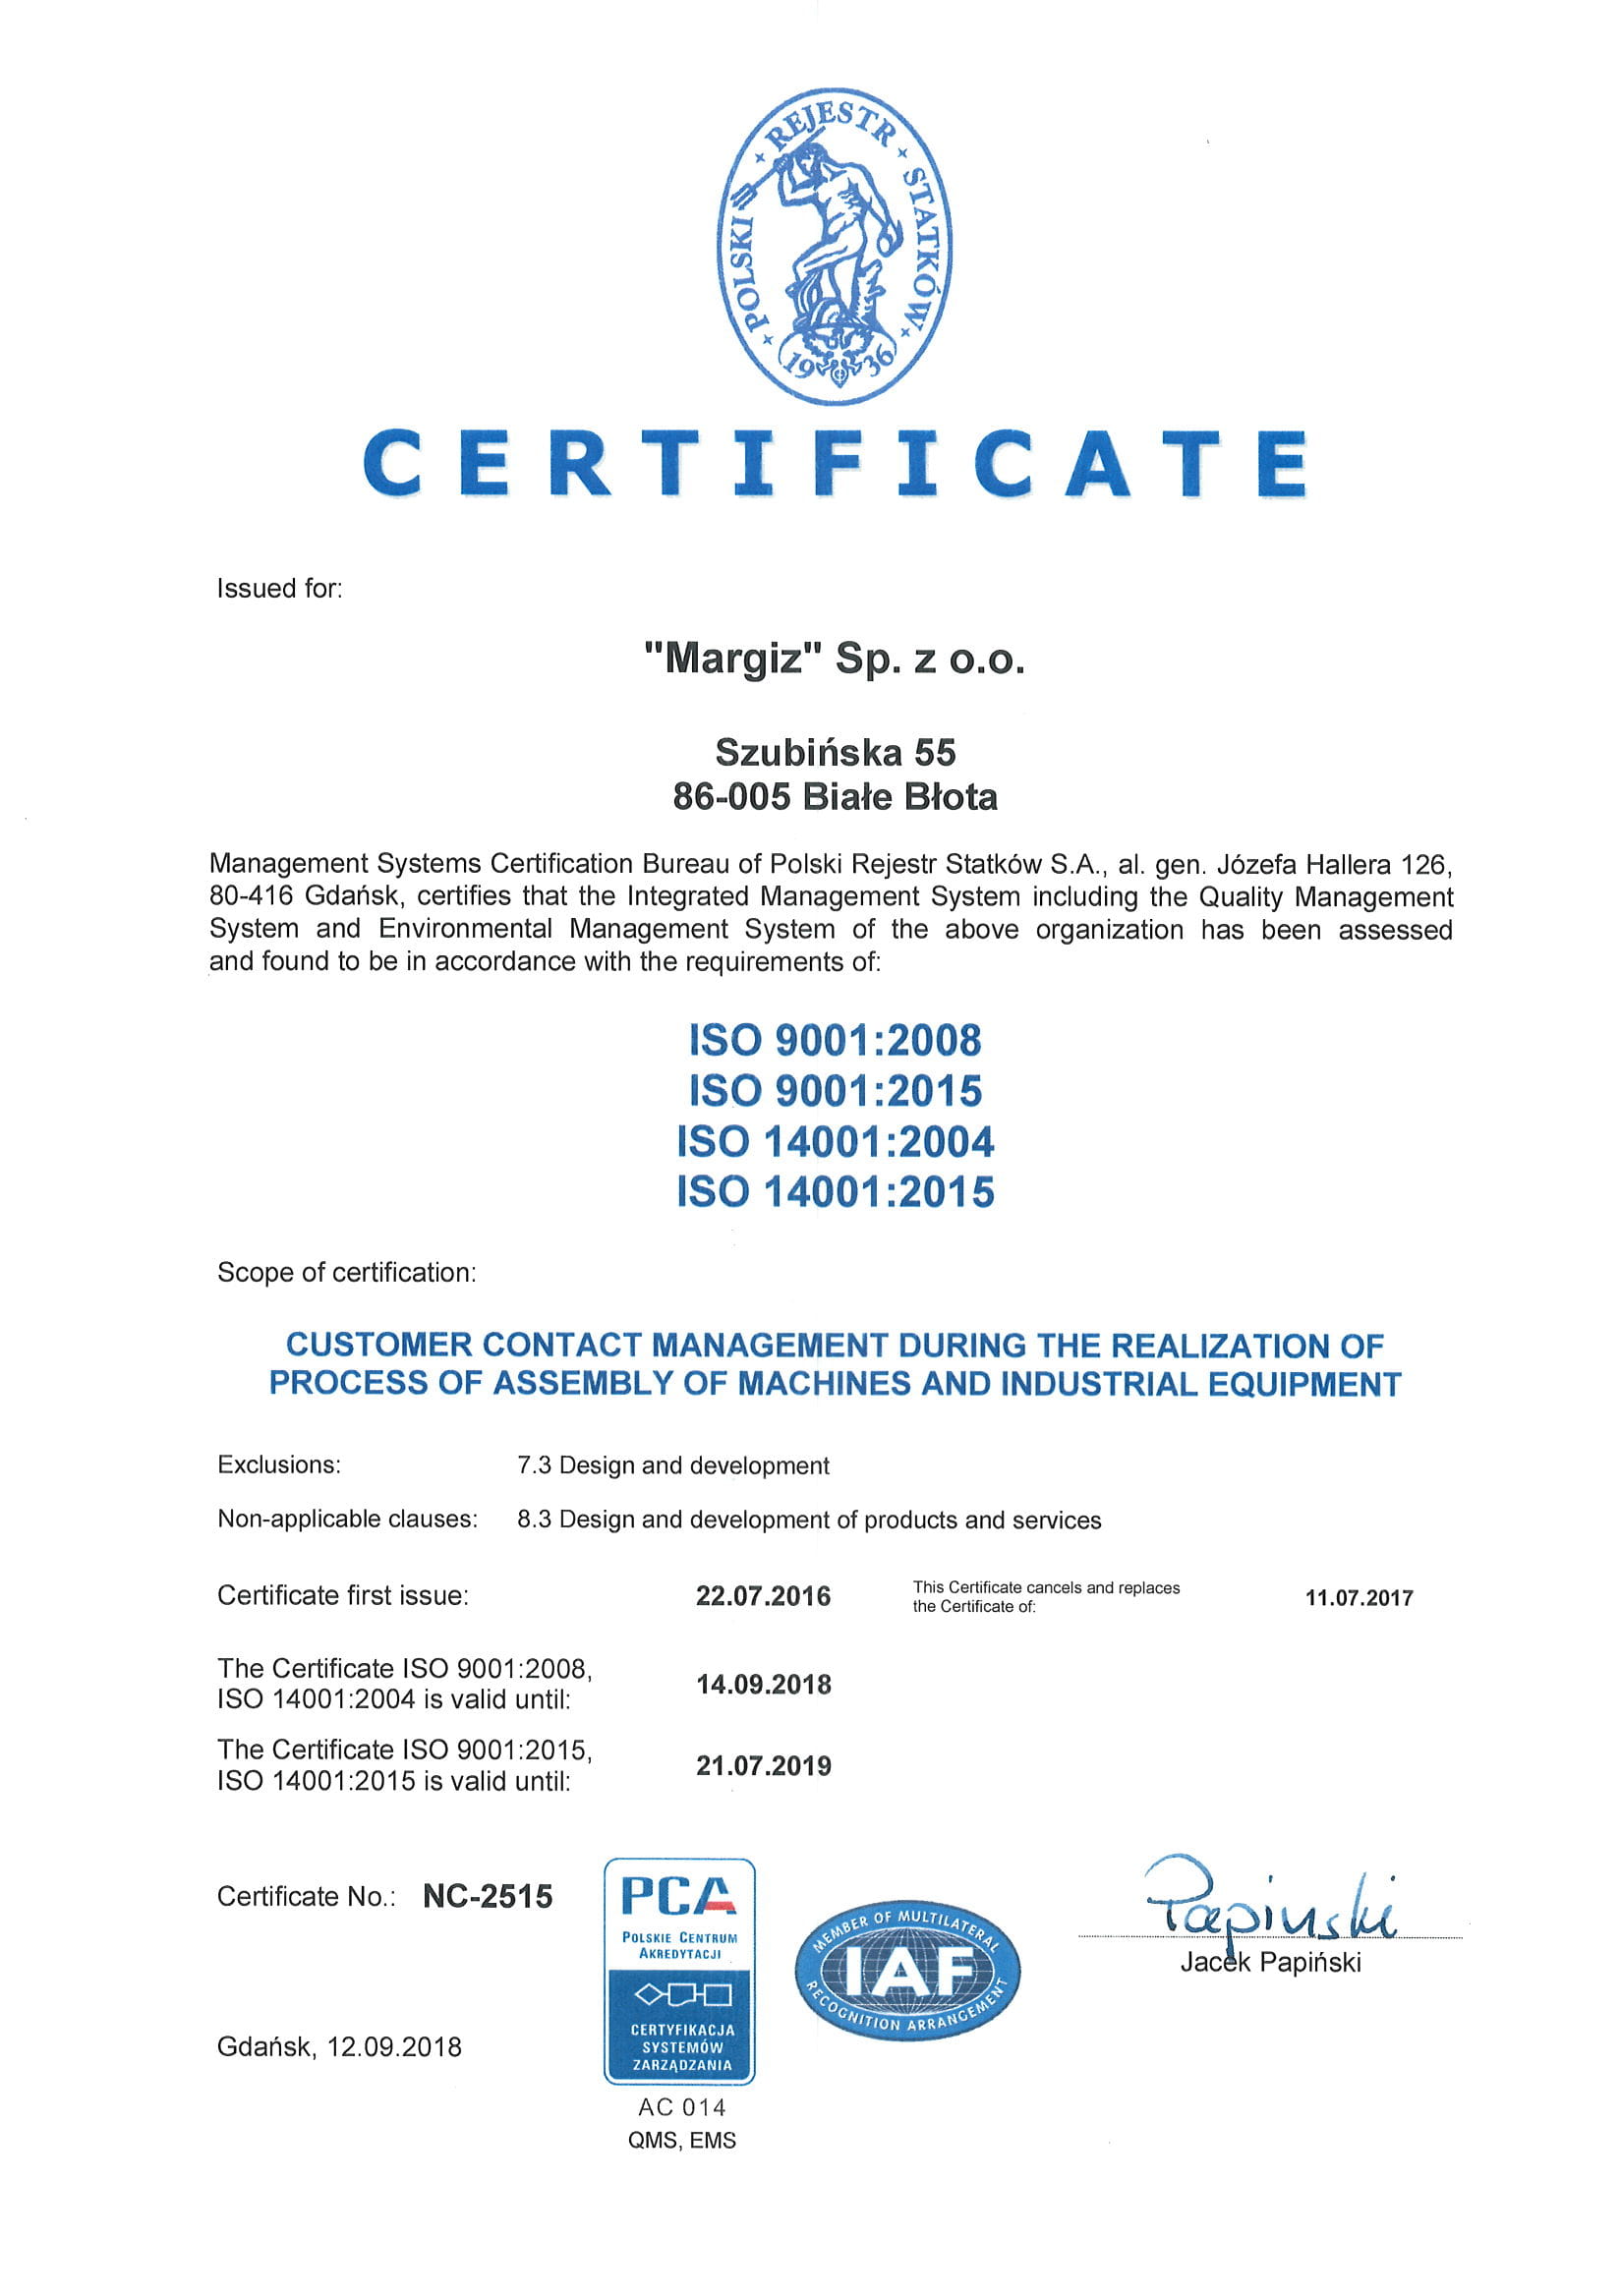 We are ISO certified company